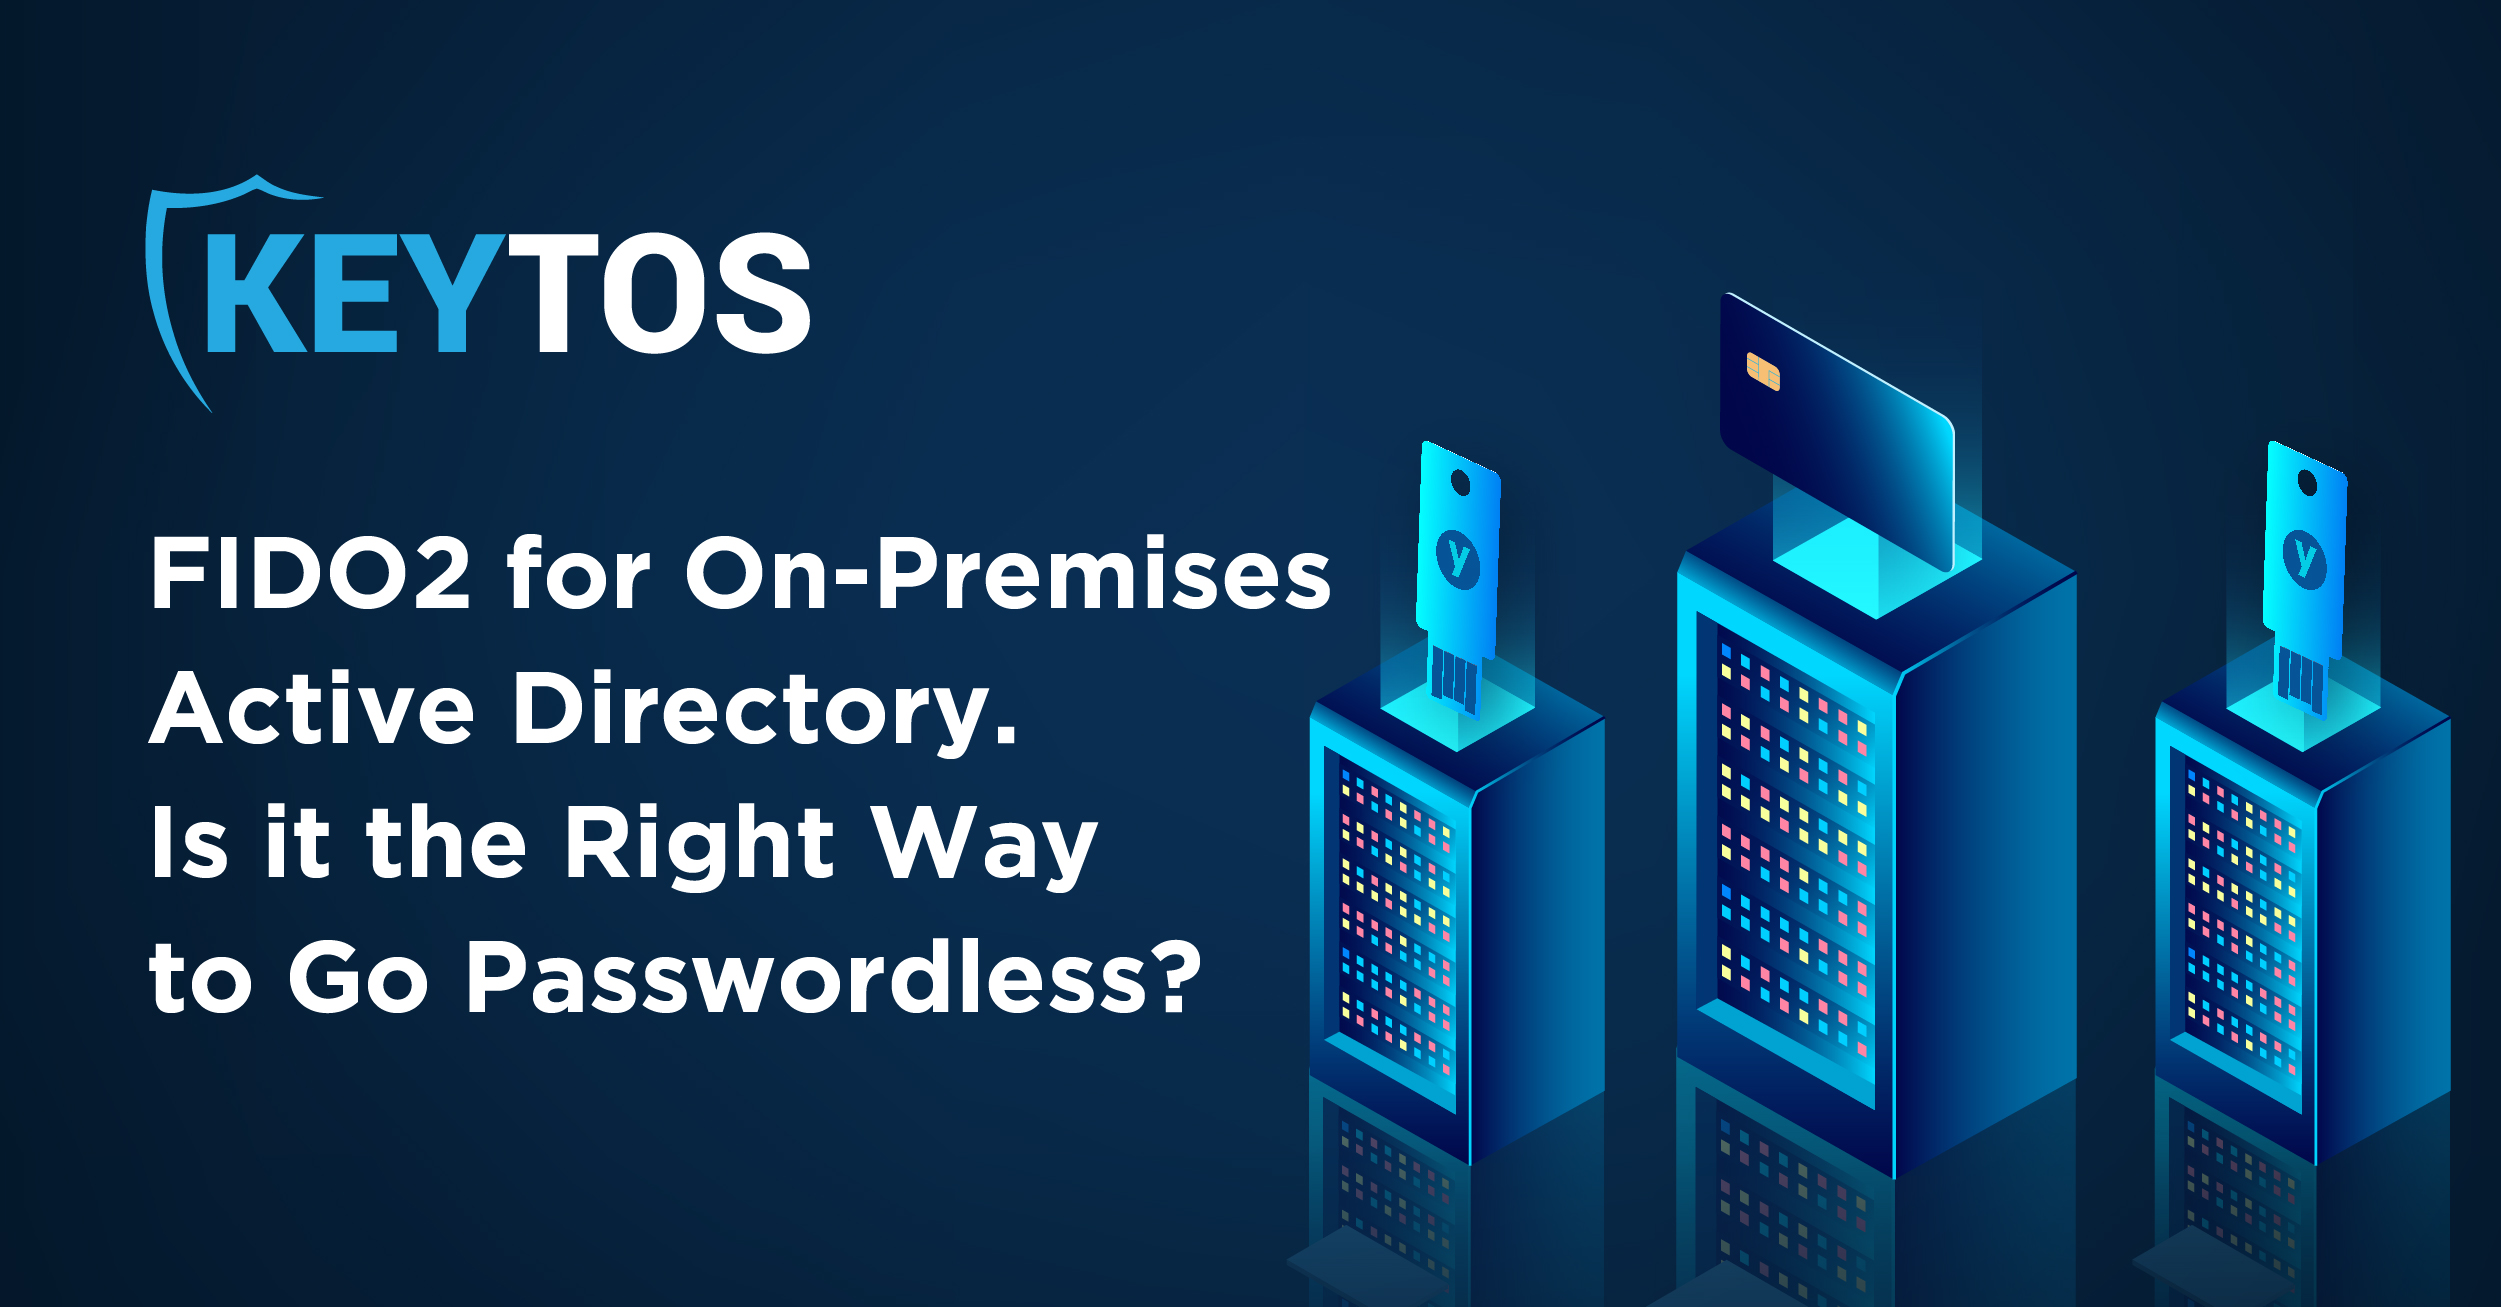 Is FIDO2 for On-Premises AD the Right Way to go Passwordless?